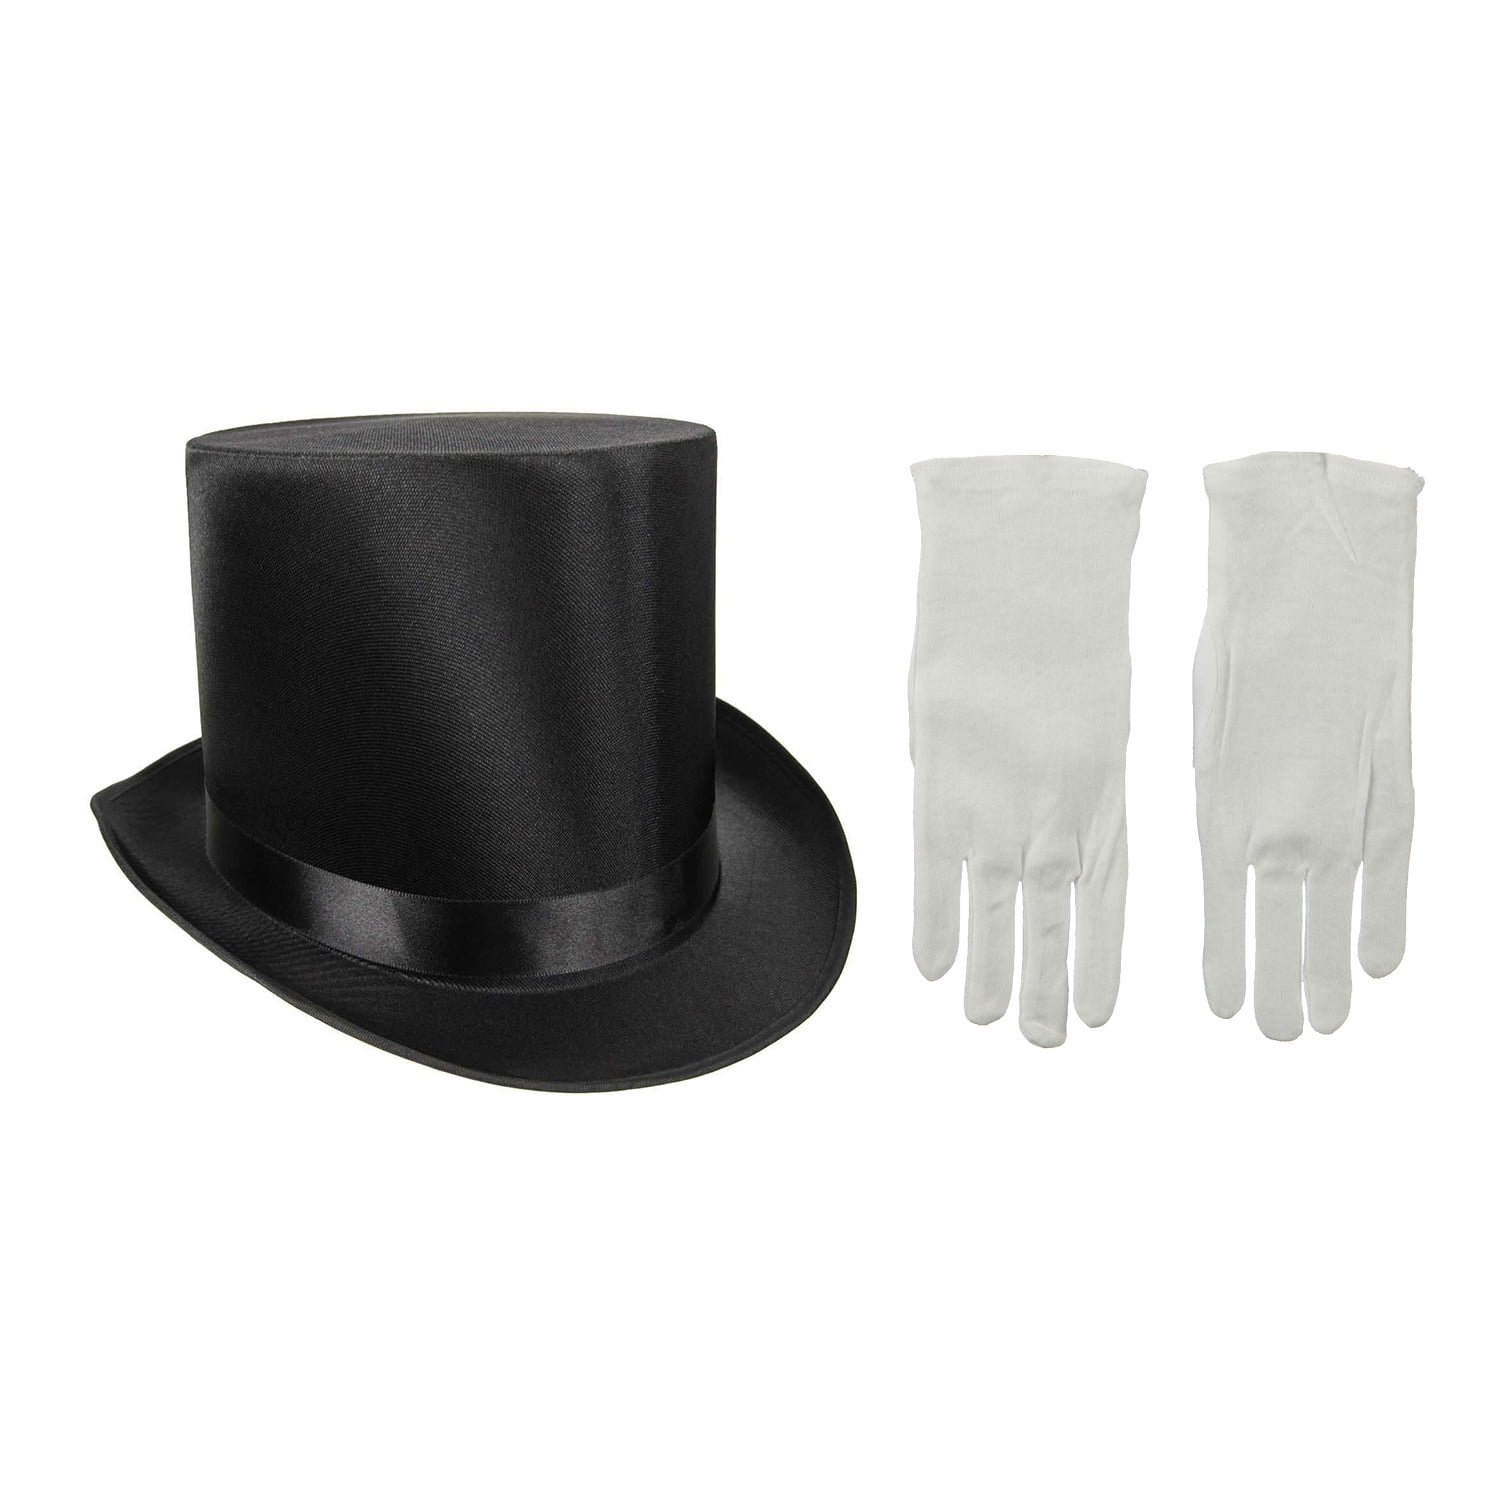 1 Pair White Gloves Magician Or Halloween Costume Accessory 